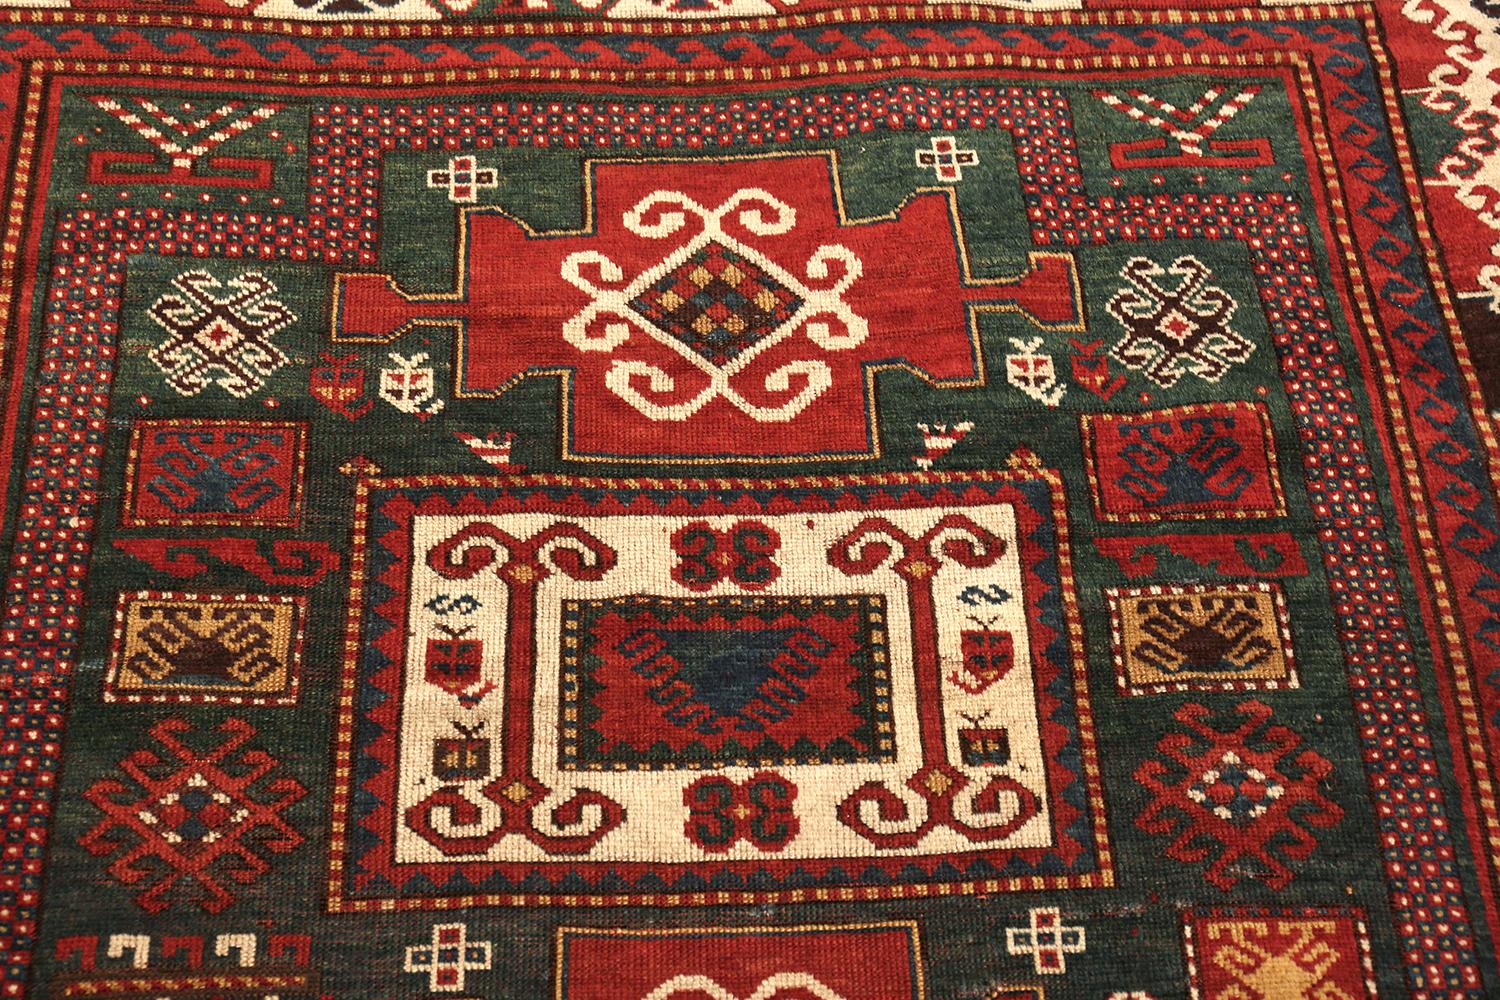 Hand-Knotted Nazmiyal Collection Antique Caucasian Kazak Rug. Size: 5 ft 4 in x 7 ft